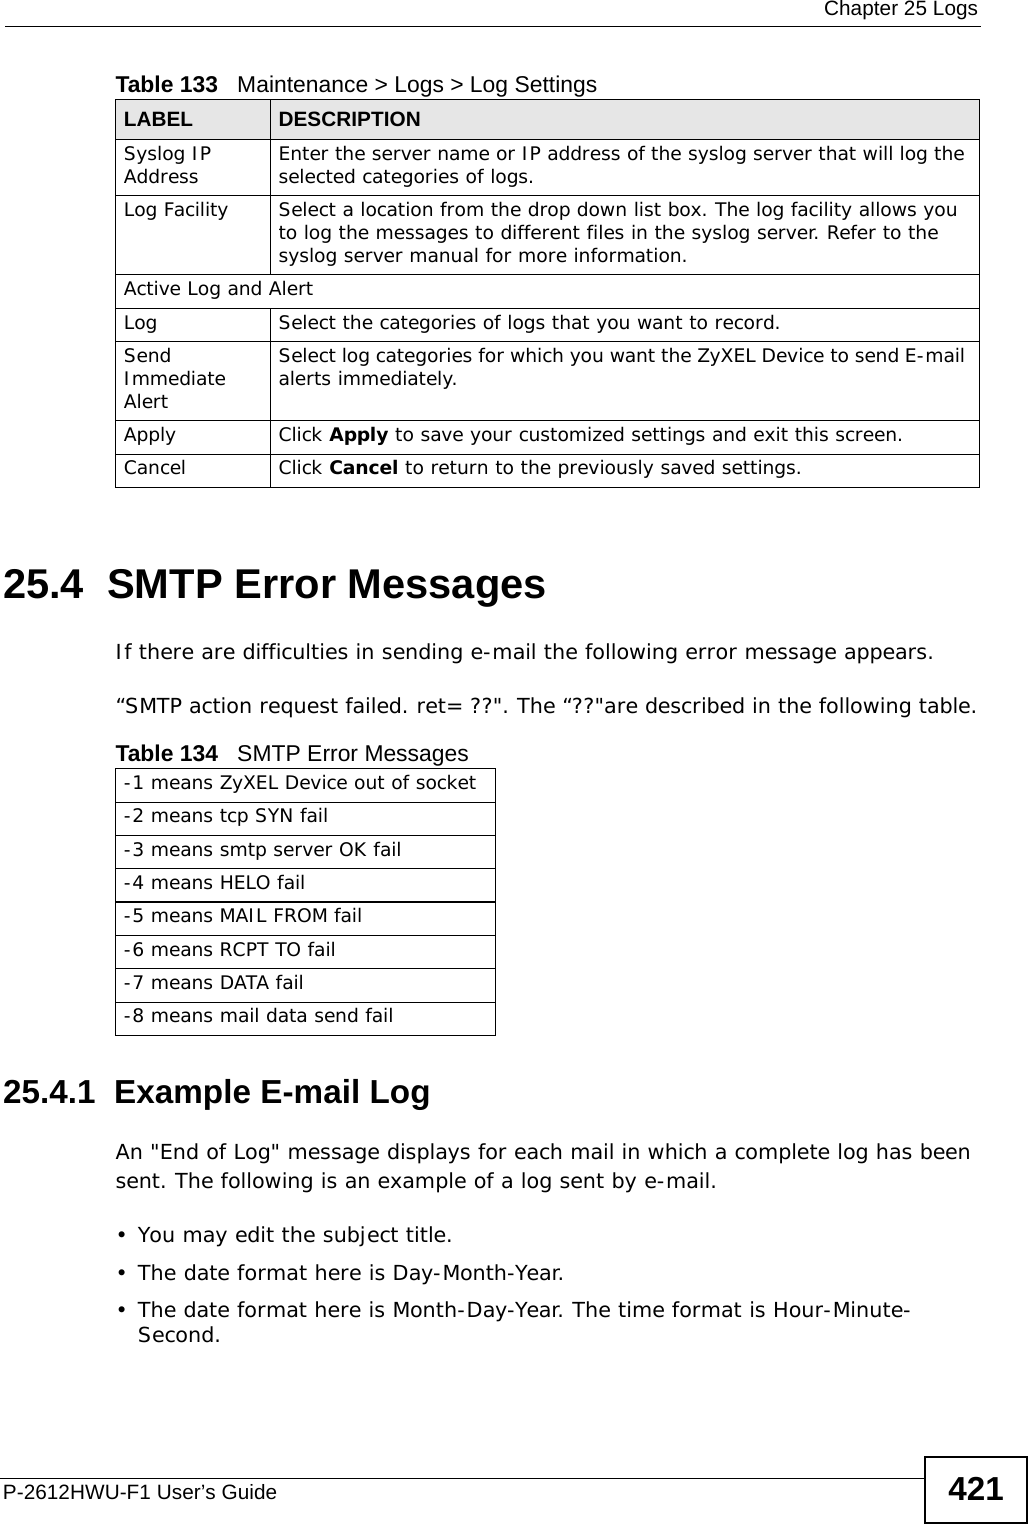  Chapter 25 LogsP-2612HWU-F1 User’s Guide 42125.4  SMTP Error MessagesIf there are difficulties in sending e-mail the following error message appears. “SMTP action request failed. ret= ??&quot;. The “??&quot;are described in the following table.25.4.1  Example E-mail LogAn &quot;End of Log&quot; message displays for each mail in which a complete log has been sent. The following is an example of a log sent by e-mail.• You may edit the subject title.• The date format here is Day-Month-Year.• The date format here is Month-Day-Year. The time format is Hour-Minute-Second.Syslog IP Address Enter the server name or IP address of the syslog server that will log the selected categories of logs. Log Facility  Select a location from the drop down list box. The log facility allows you to log the messages to different files in the syslog server. Refer to the syslog server manual for more information. Active Log and AlertLog Select the categories of logs that you want to record.Send Immediate Alert Select log categories for which you want the ZyXEL Device to send E-mail alerts immediately. Apply Click Apply to save your customized settings and exit this screen. Cancel Click Cancel to return to the previously saved settings.Table 133   Maintenance &gt; Logs &gt; Log SettingsLABEL DESCRIPTIONTable 134   SMTP Error Messages-1 means ZyXEL Device out of socket-2 means tcp SYN fail -3 means smtp server OK fail -4 means HELO fail -5 means MAIL FROM fail -6 means RCPT TO fail -7 means DATA fail -8 means mail data send fail 